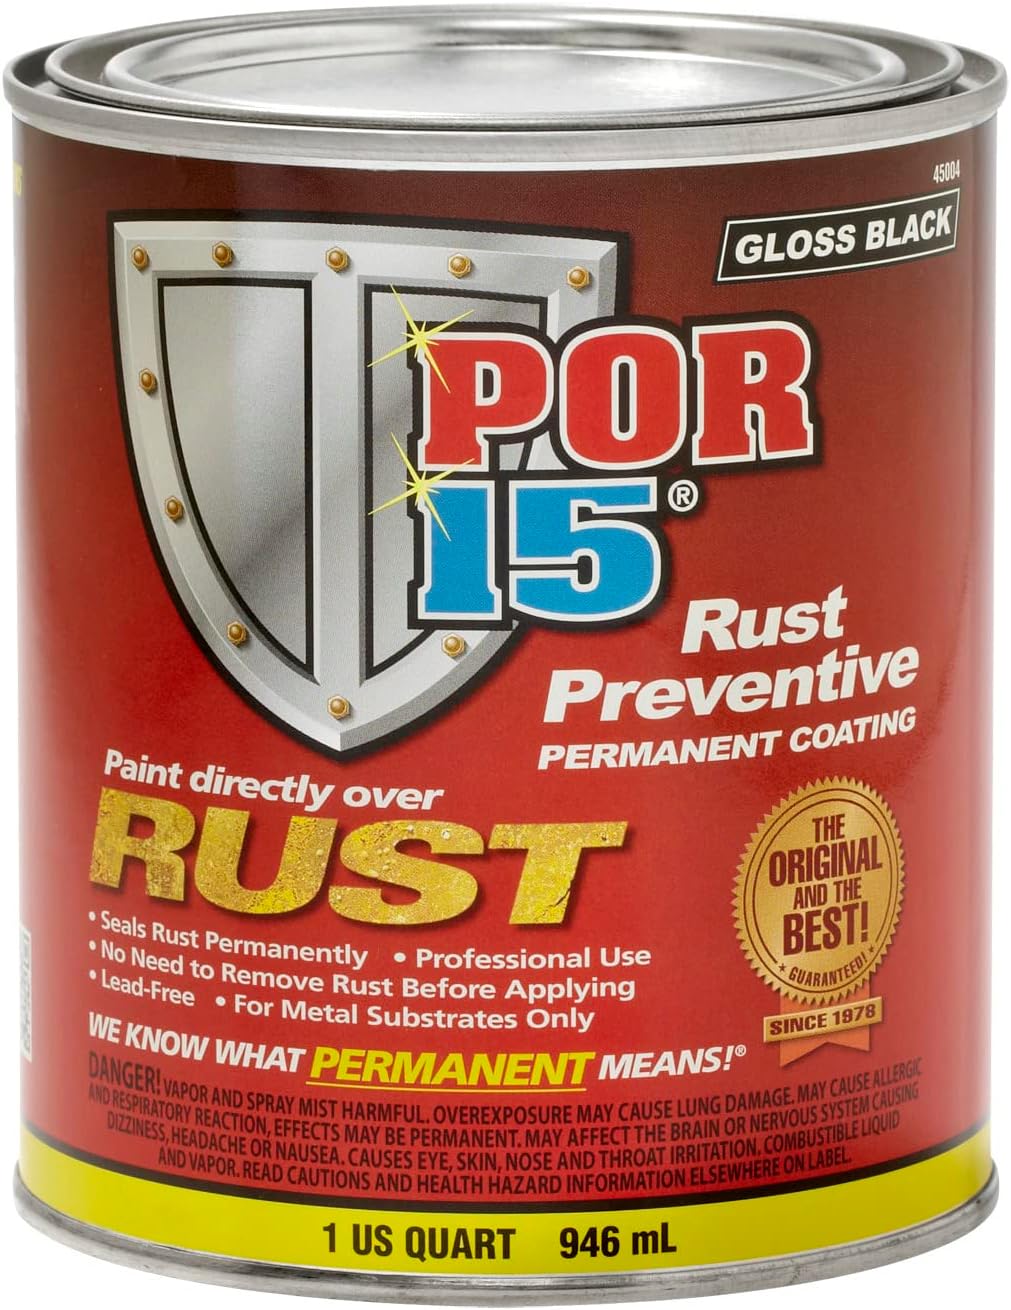 POR-15 Rust Preventive Paint, Stop Rust and Corrosion [...]